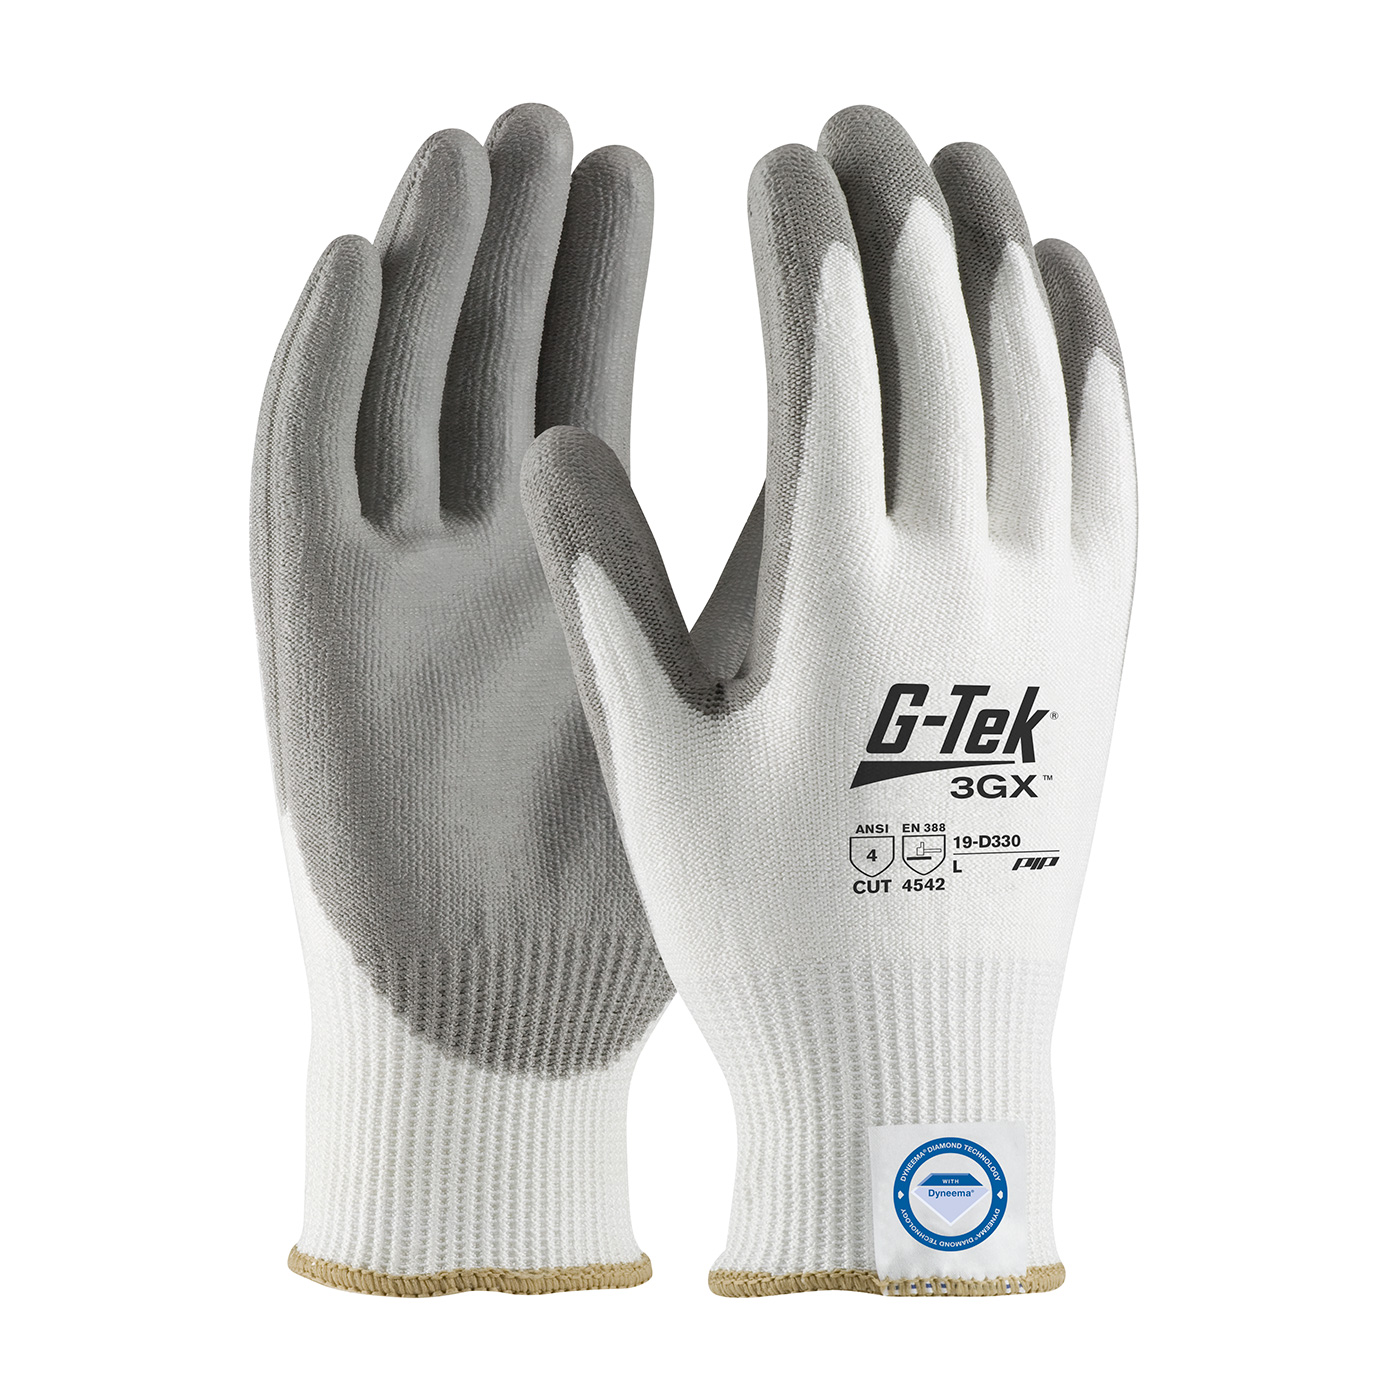 PIP 19-D330/L G-Tek 3GX Seamless Knit Dyneema Diamond Blended Glove with Polyurethane Coated Smooth Grip on Palm & Fingers - Large PID-19 D330 L